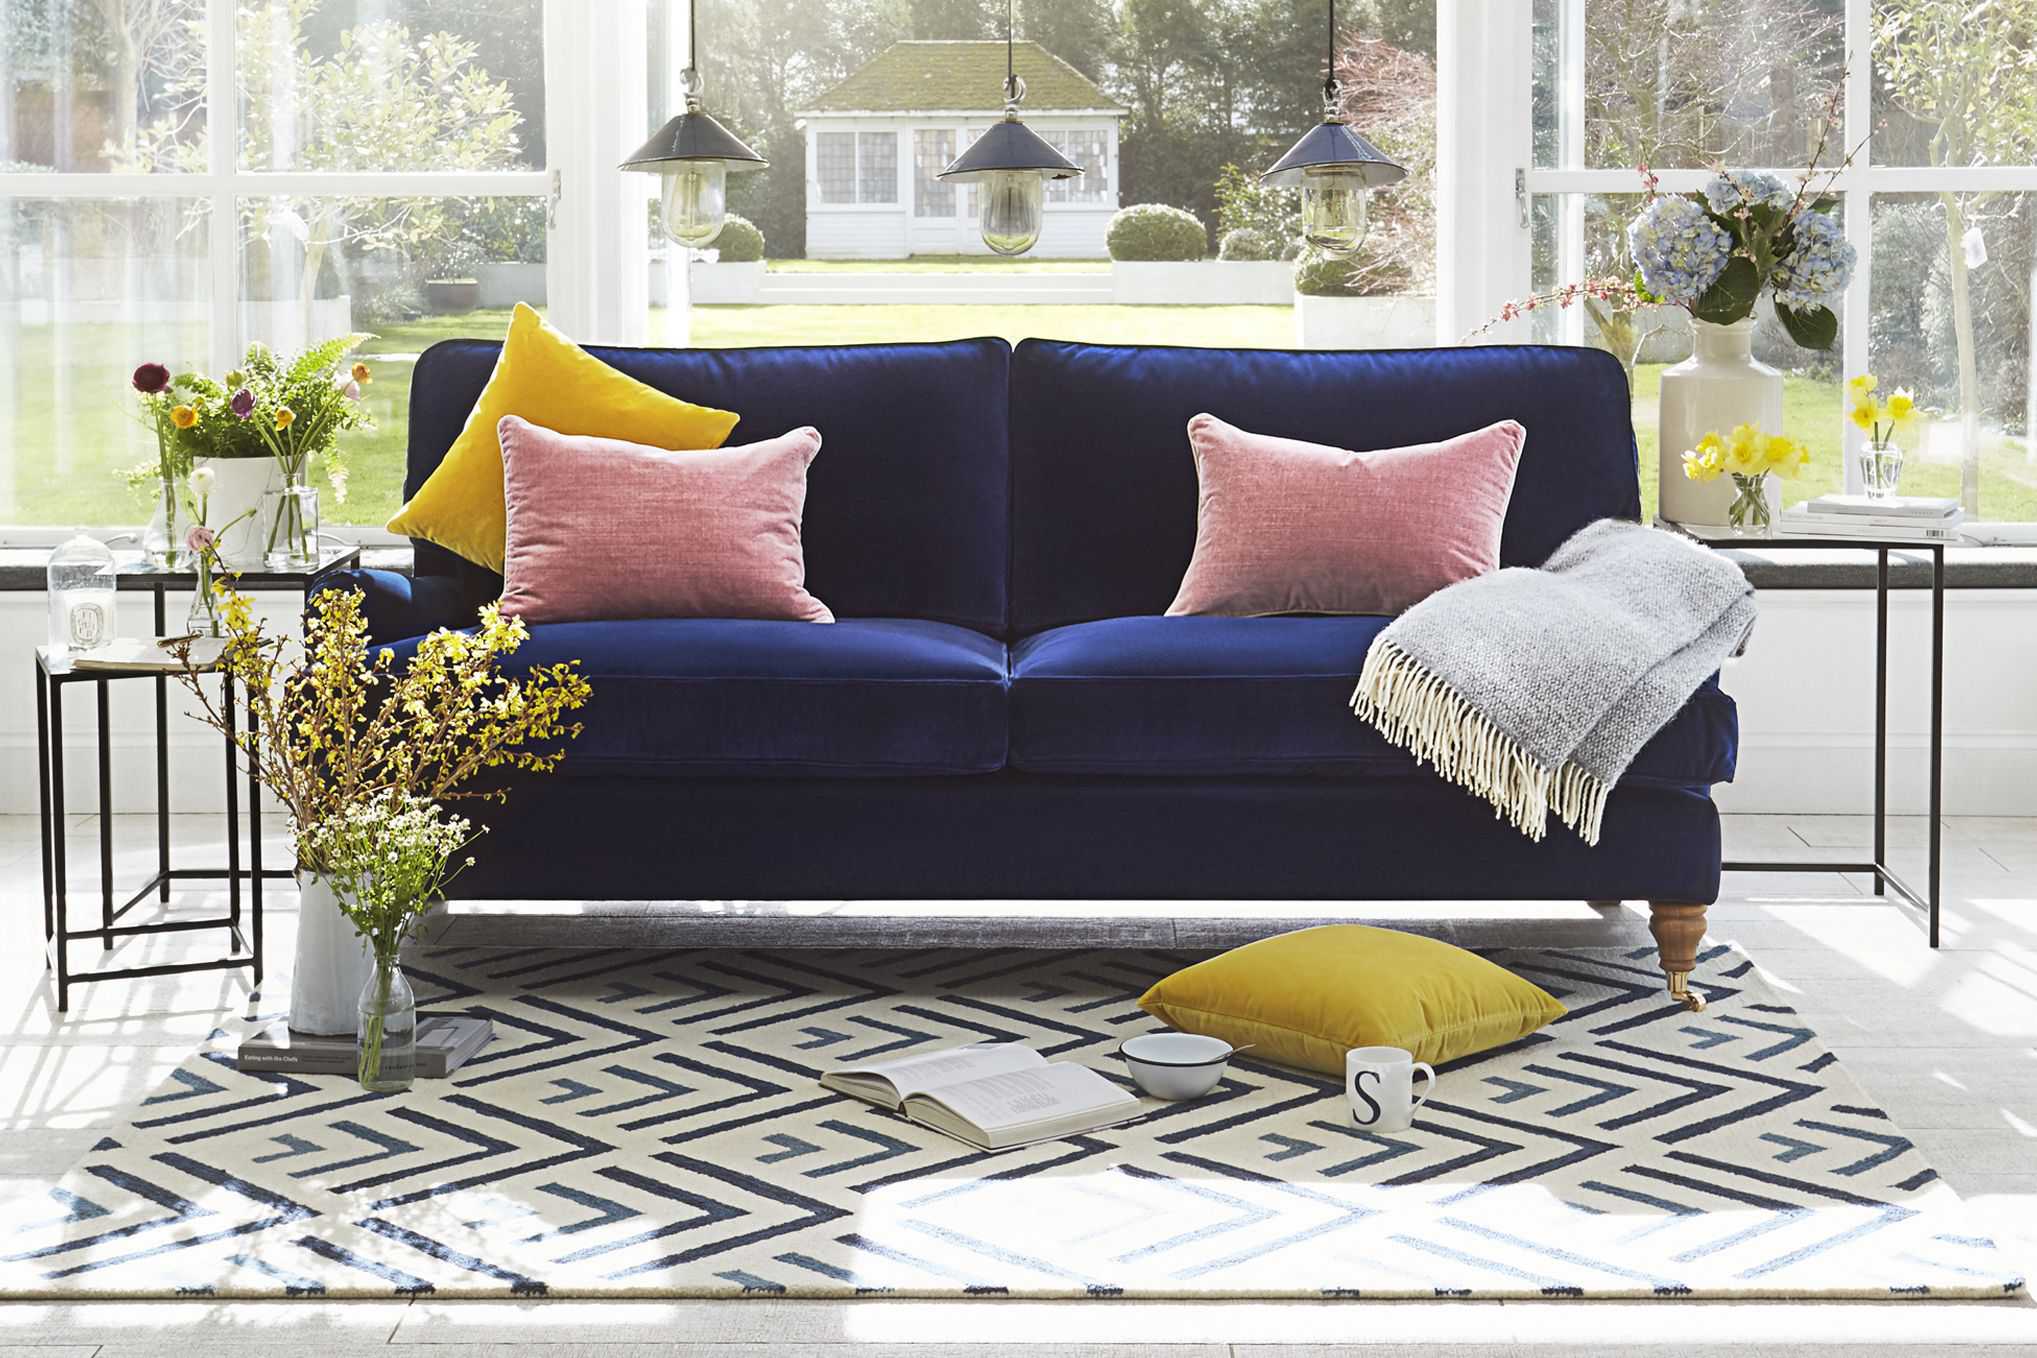 Bluebell Clay House Basket Weave Sofa - 3 Seater